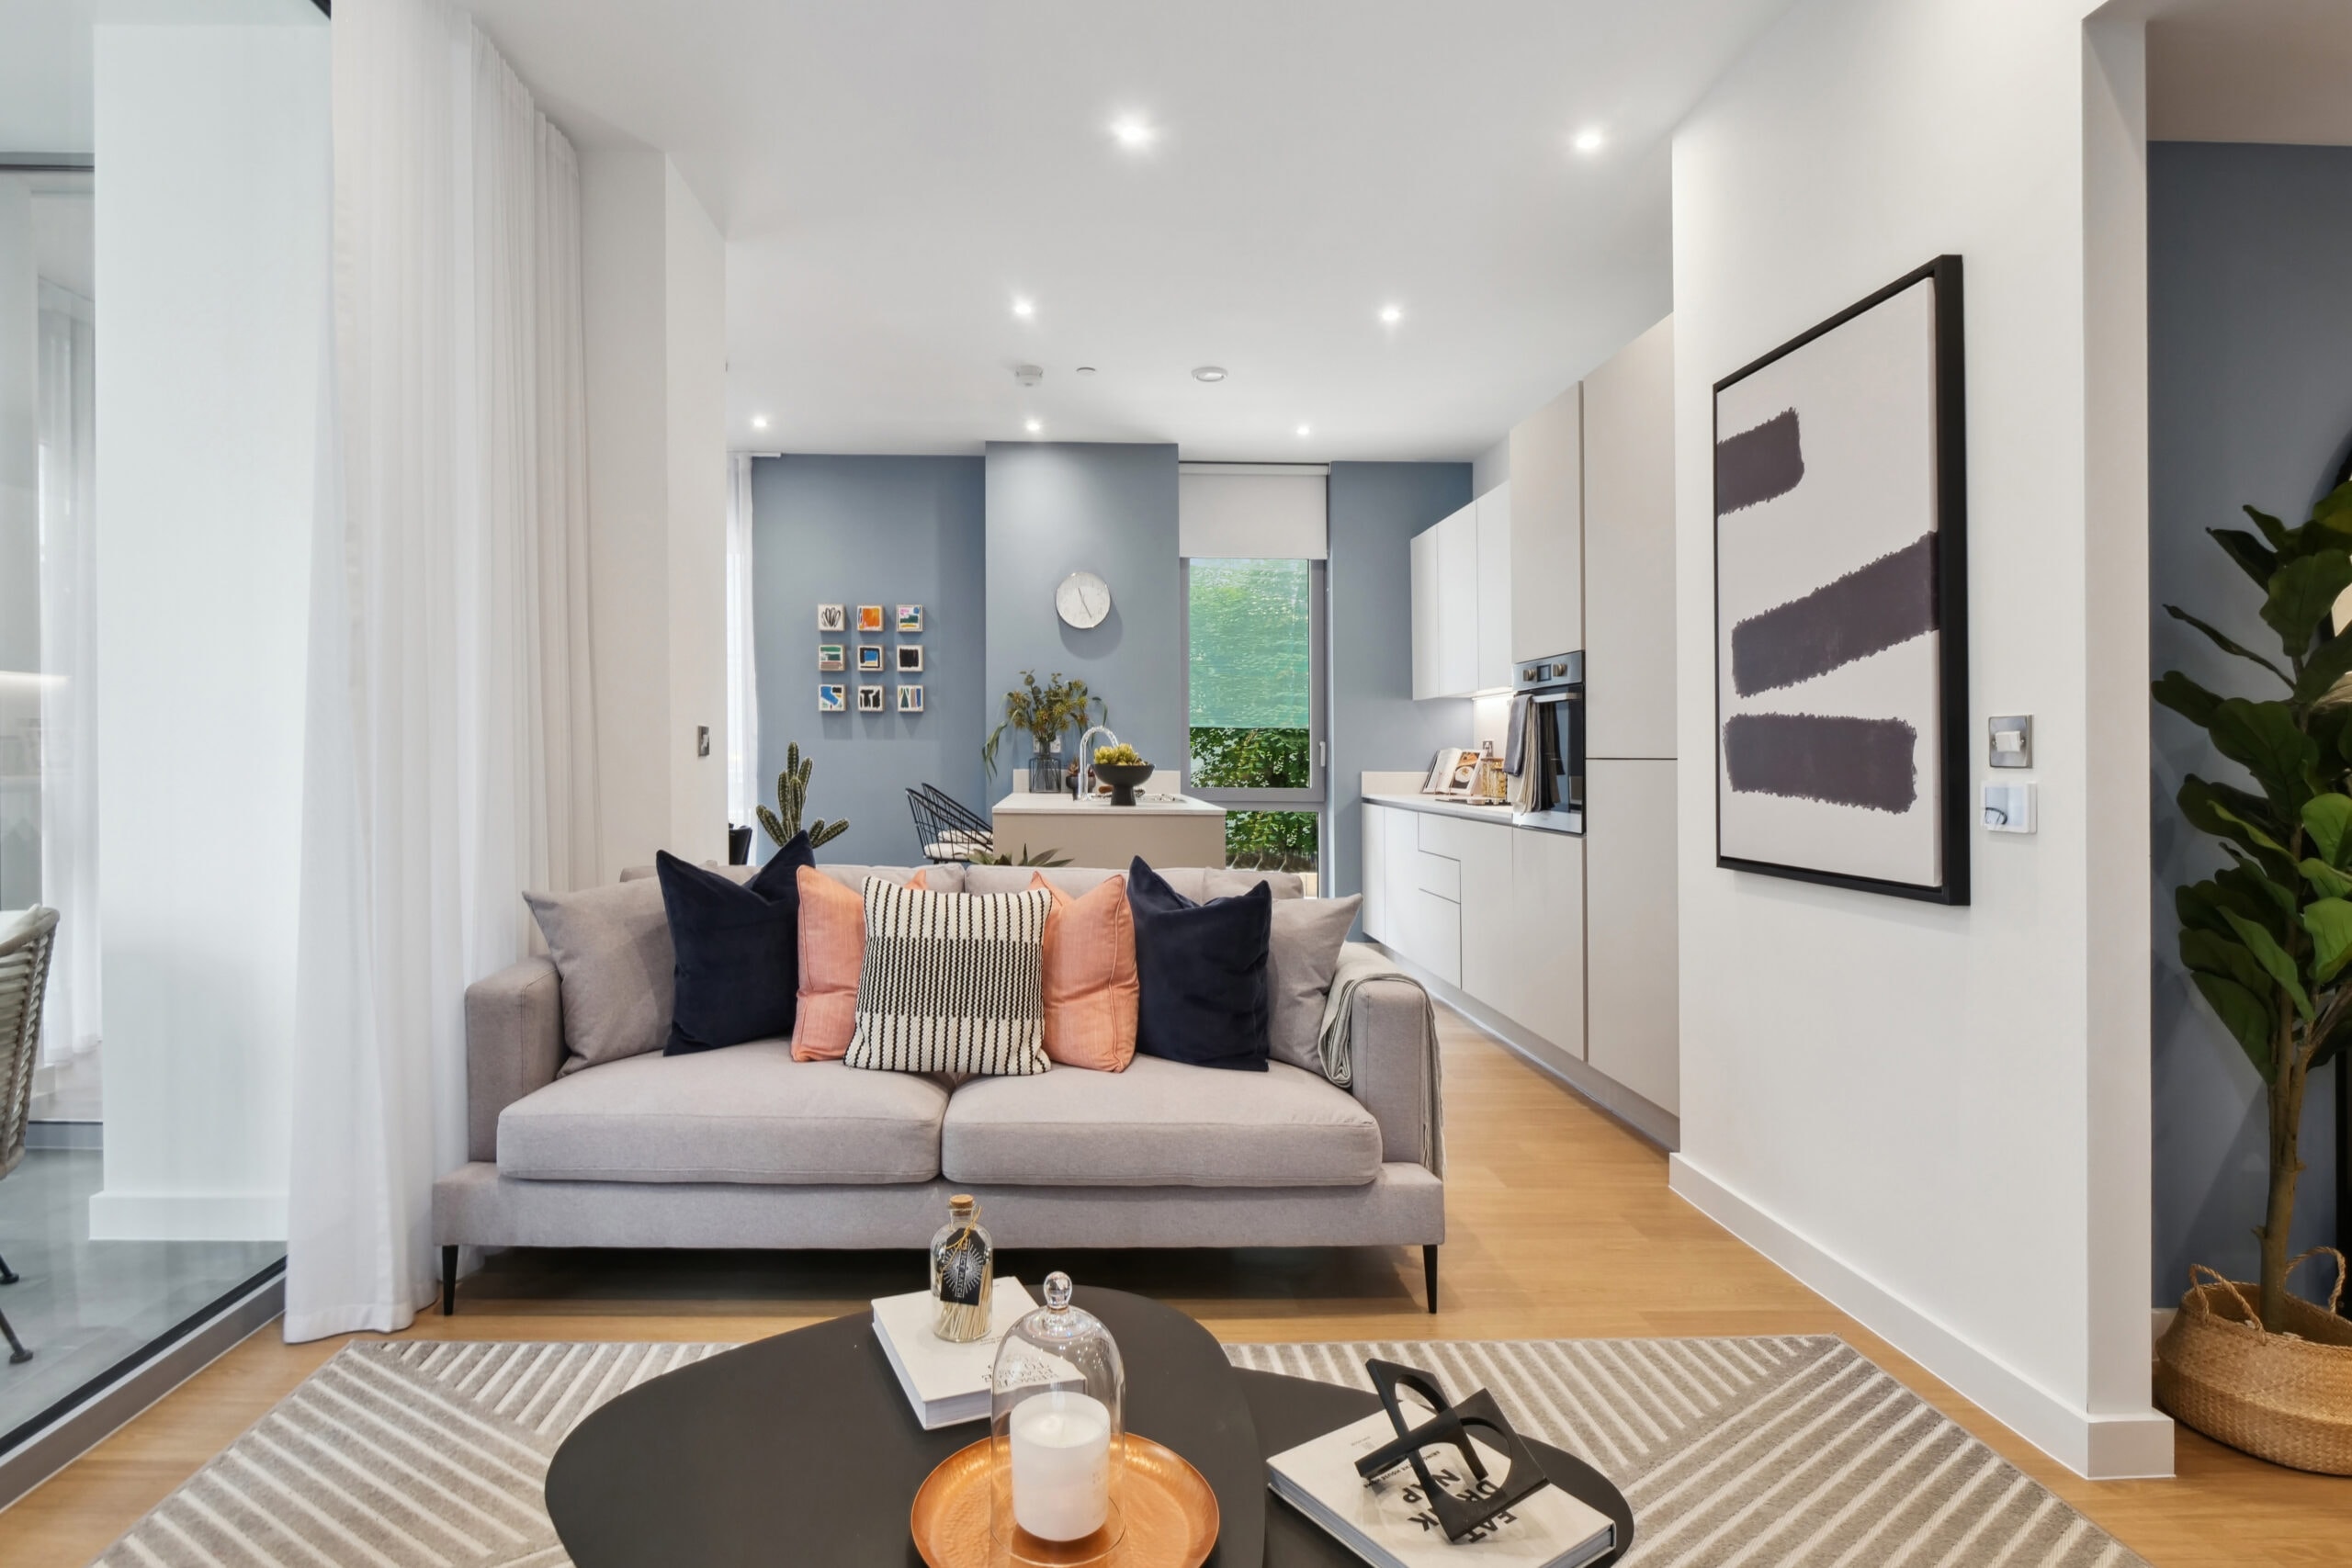 An internal image of Notting Hill Genesis's Aspect Croydon development - available to purchase through Shared Ownership on Share to Buy!